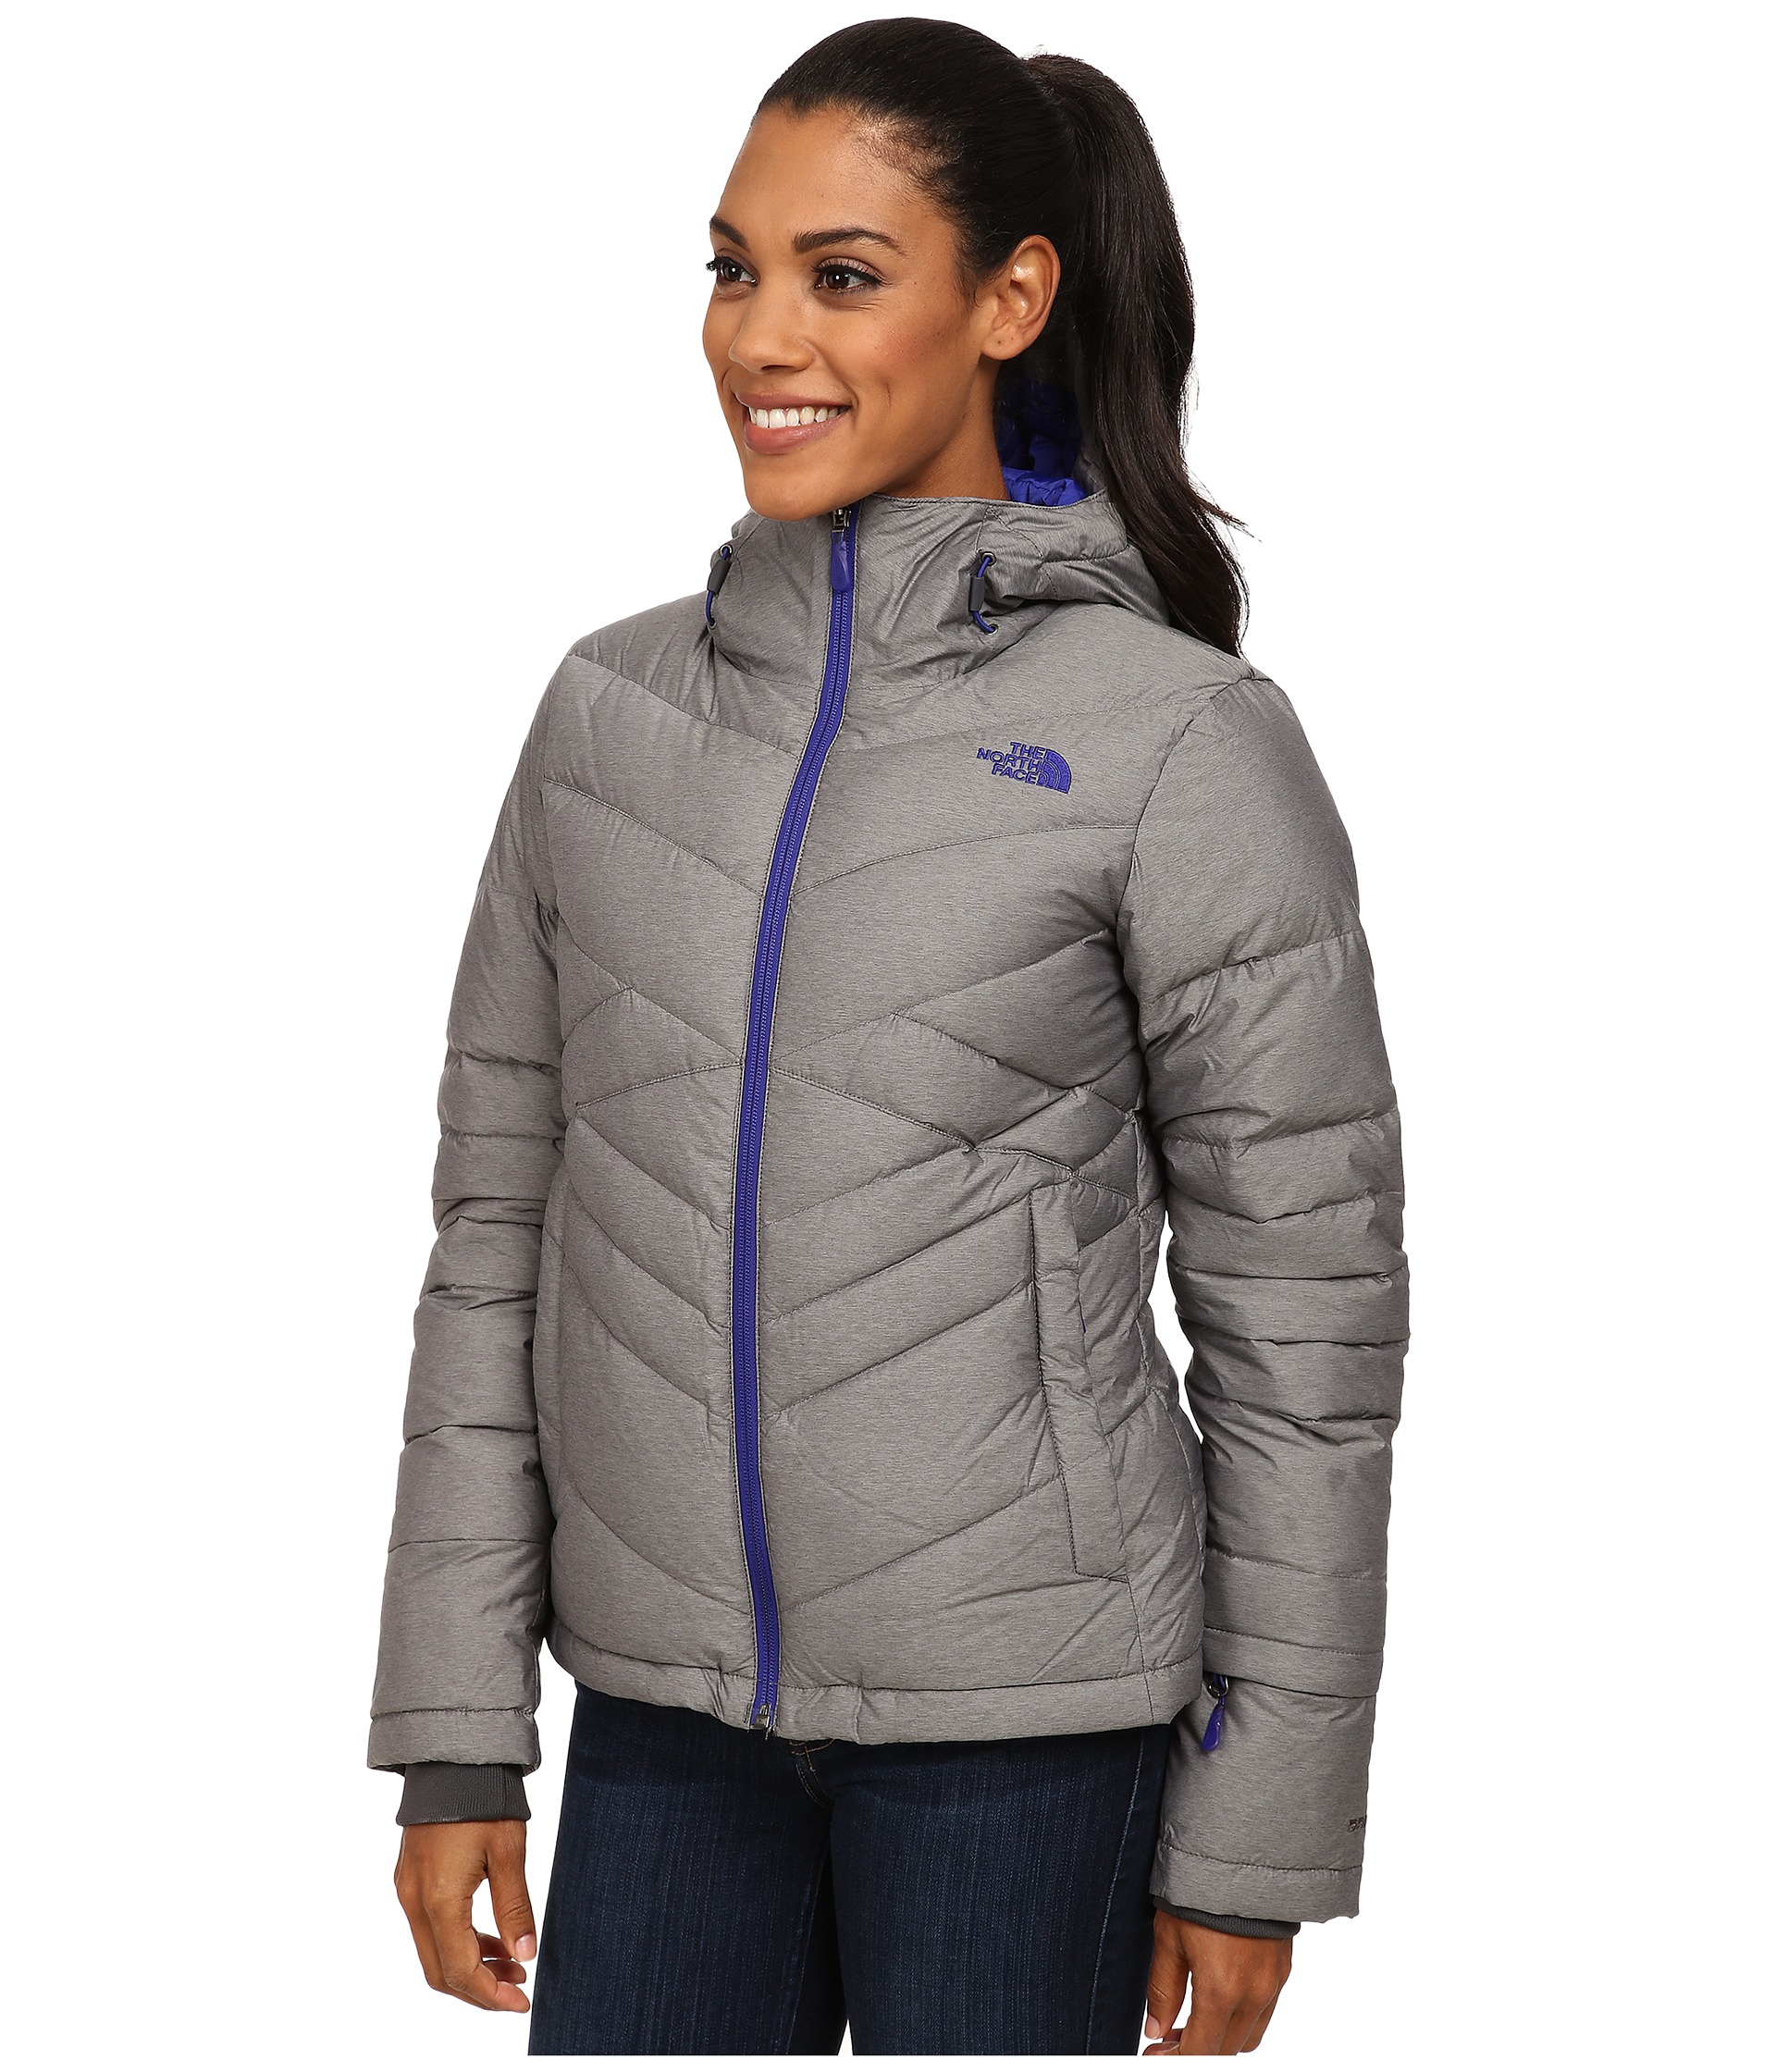 Lyst - The North Face Destiny Down Jacket in Gray